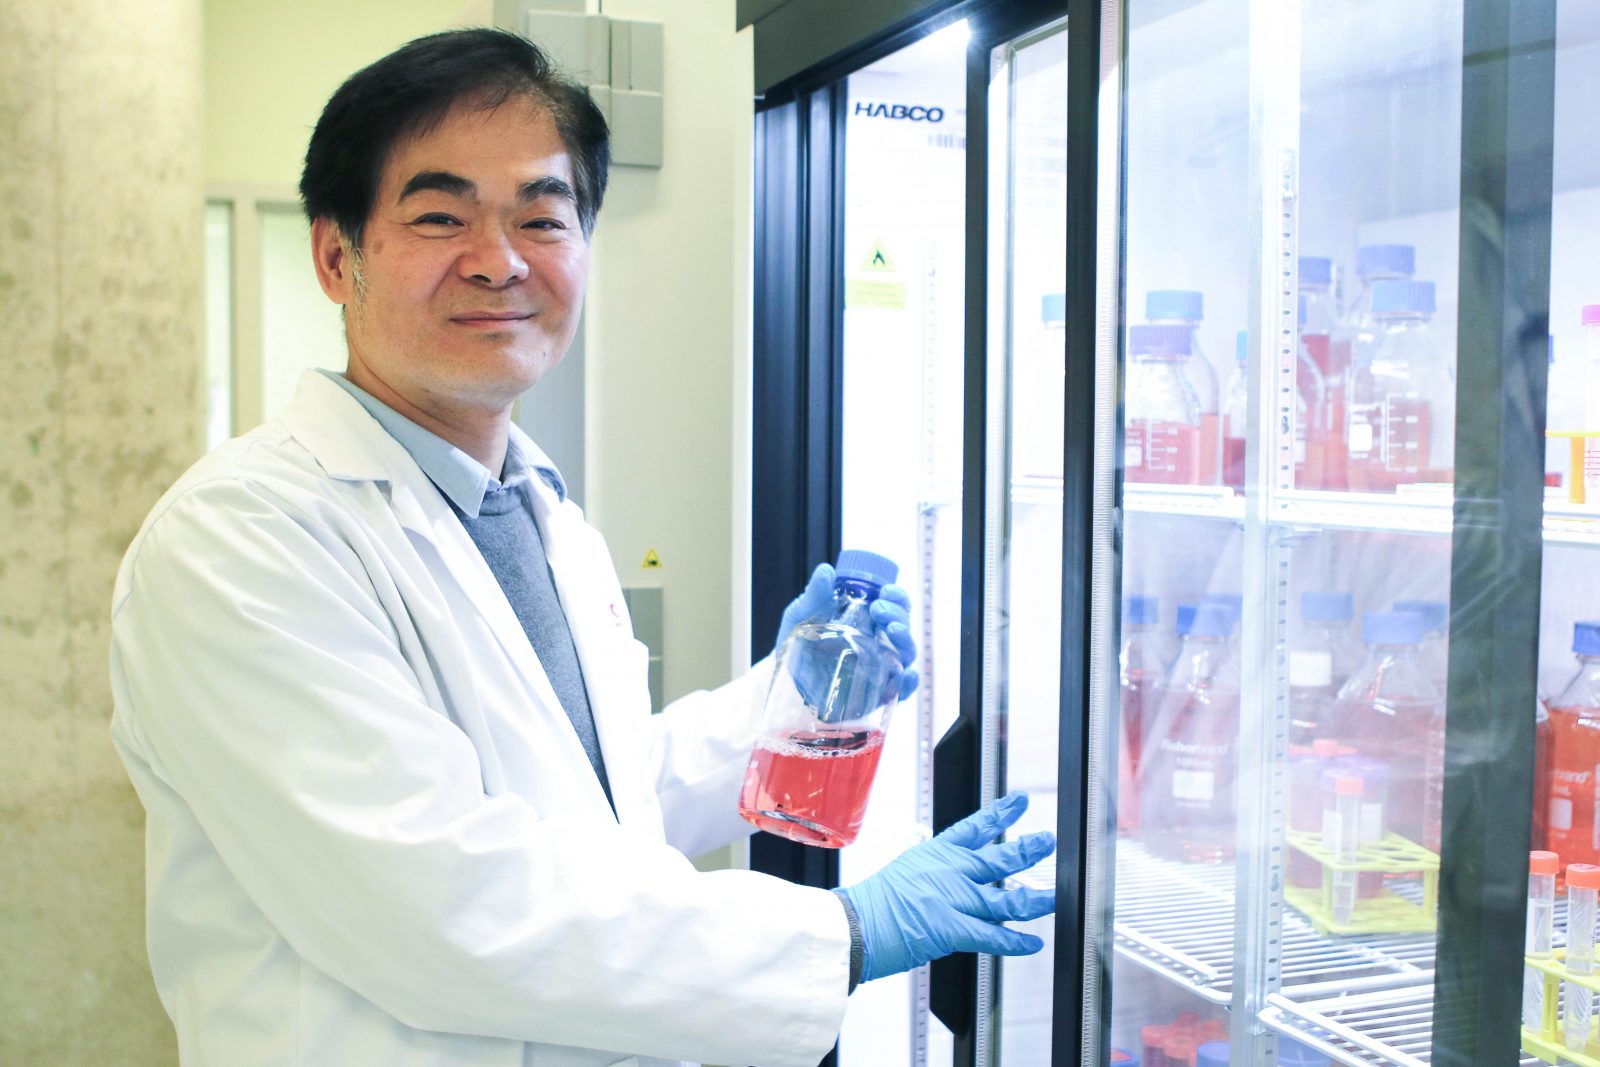 Close-up of Newman Sze, wearing a lab coat, removing a vial of pink-coloured liquid from a refrigerator filled with similar containers.